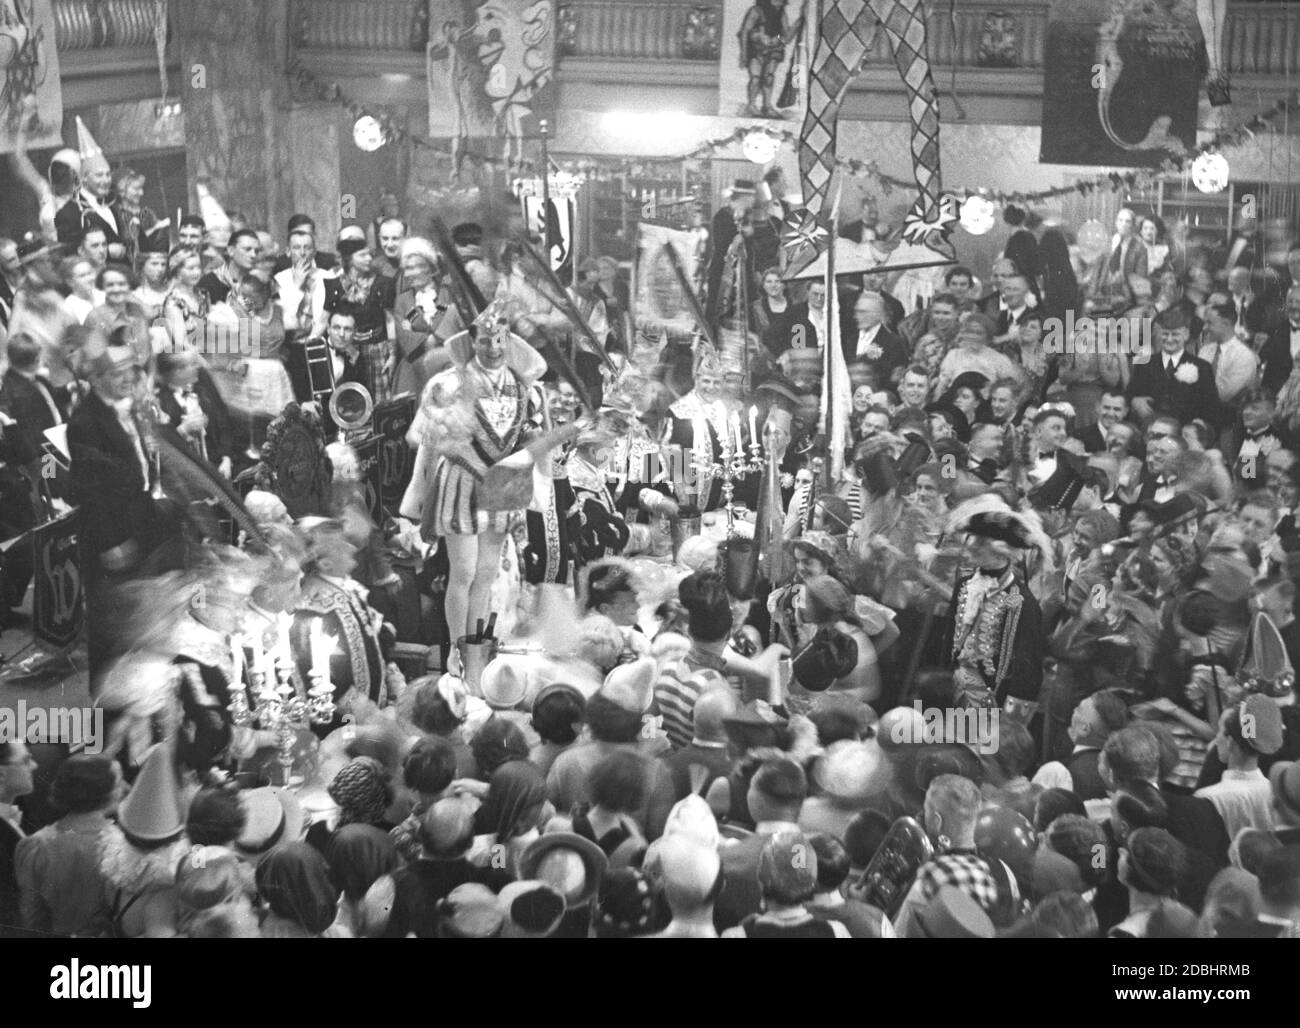 'A man personifying ''Prince Carnival'' (center, standing on the table) greets the guests of the Alaaf Carnival Ball at the Berlin Zoo with a speech. Undated photo, taken around 1935.' Stock Photo